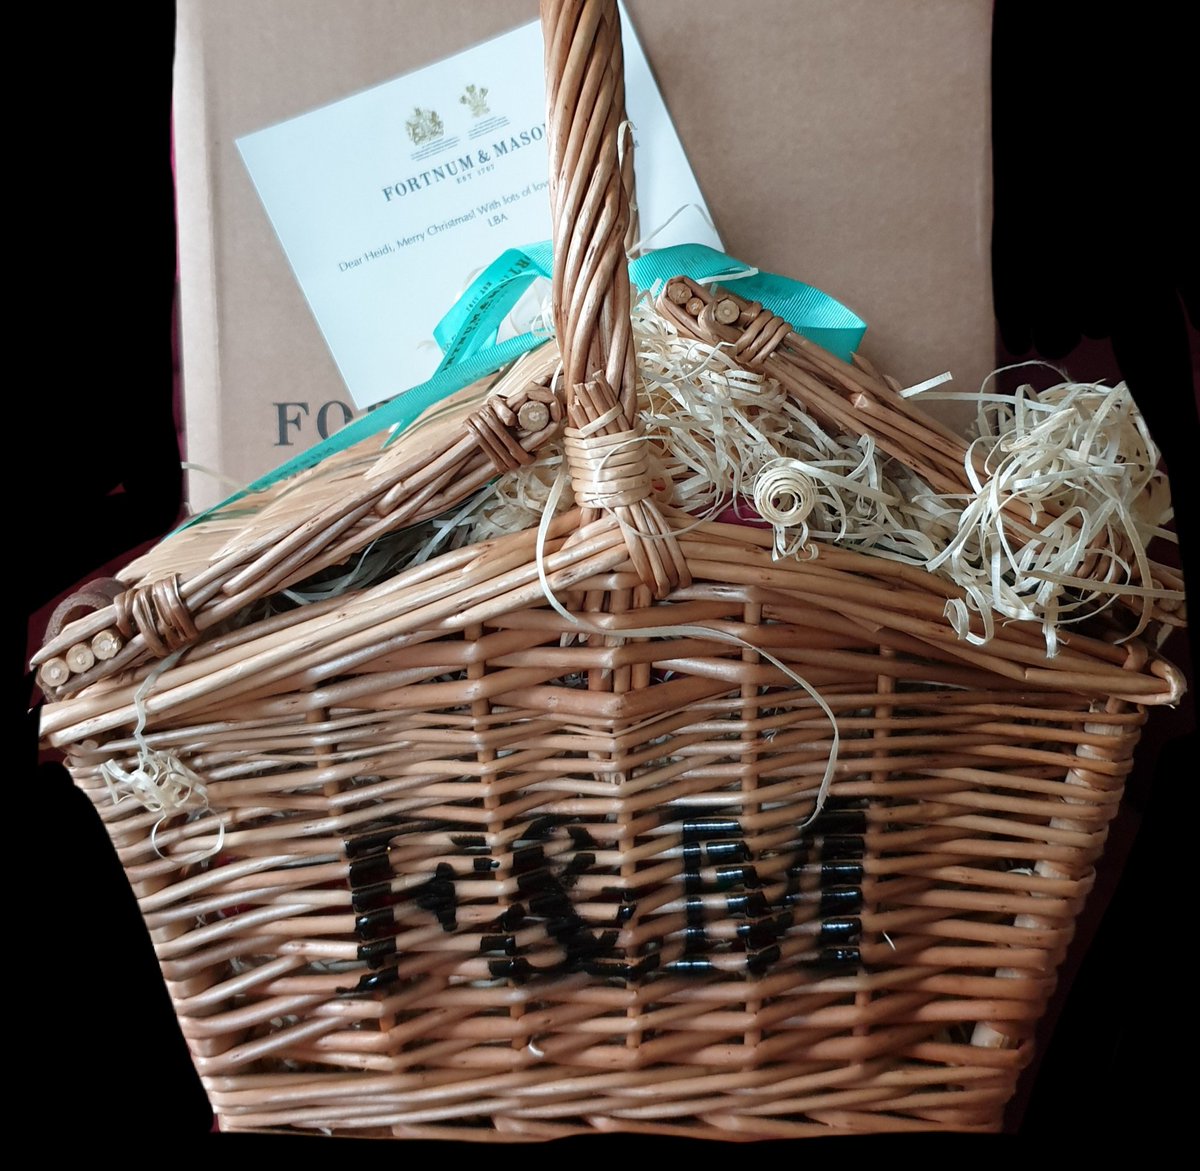 How beautiful is this fabulous @Fortnums hamper? It just arrived, was a total surprise and is very much appreciated! 🌲💙🌲💙🌲💙🌲 #hamper #festivetreats #tea #biscuits #christmaspudding #jam #reindeernoses #feelingpampered #Christmas #fortnumandmason